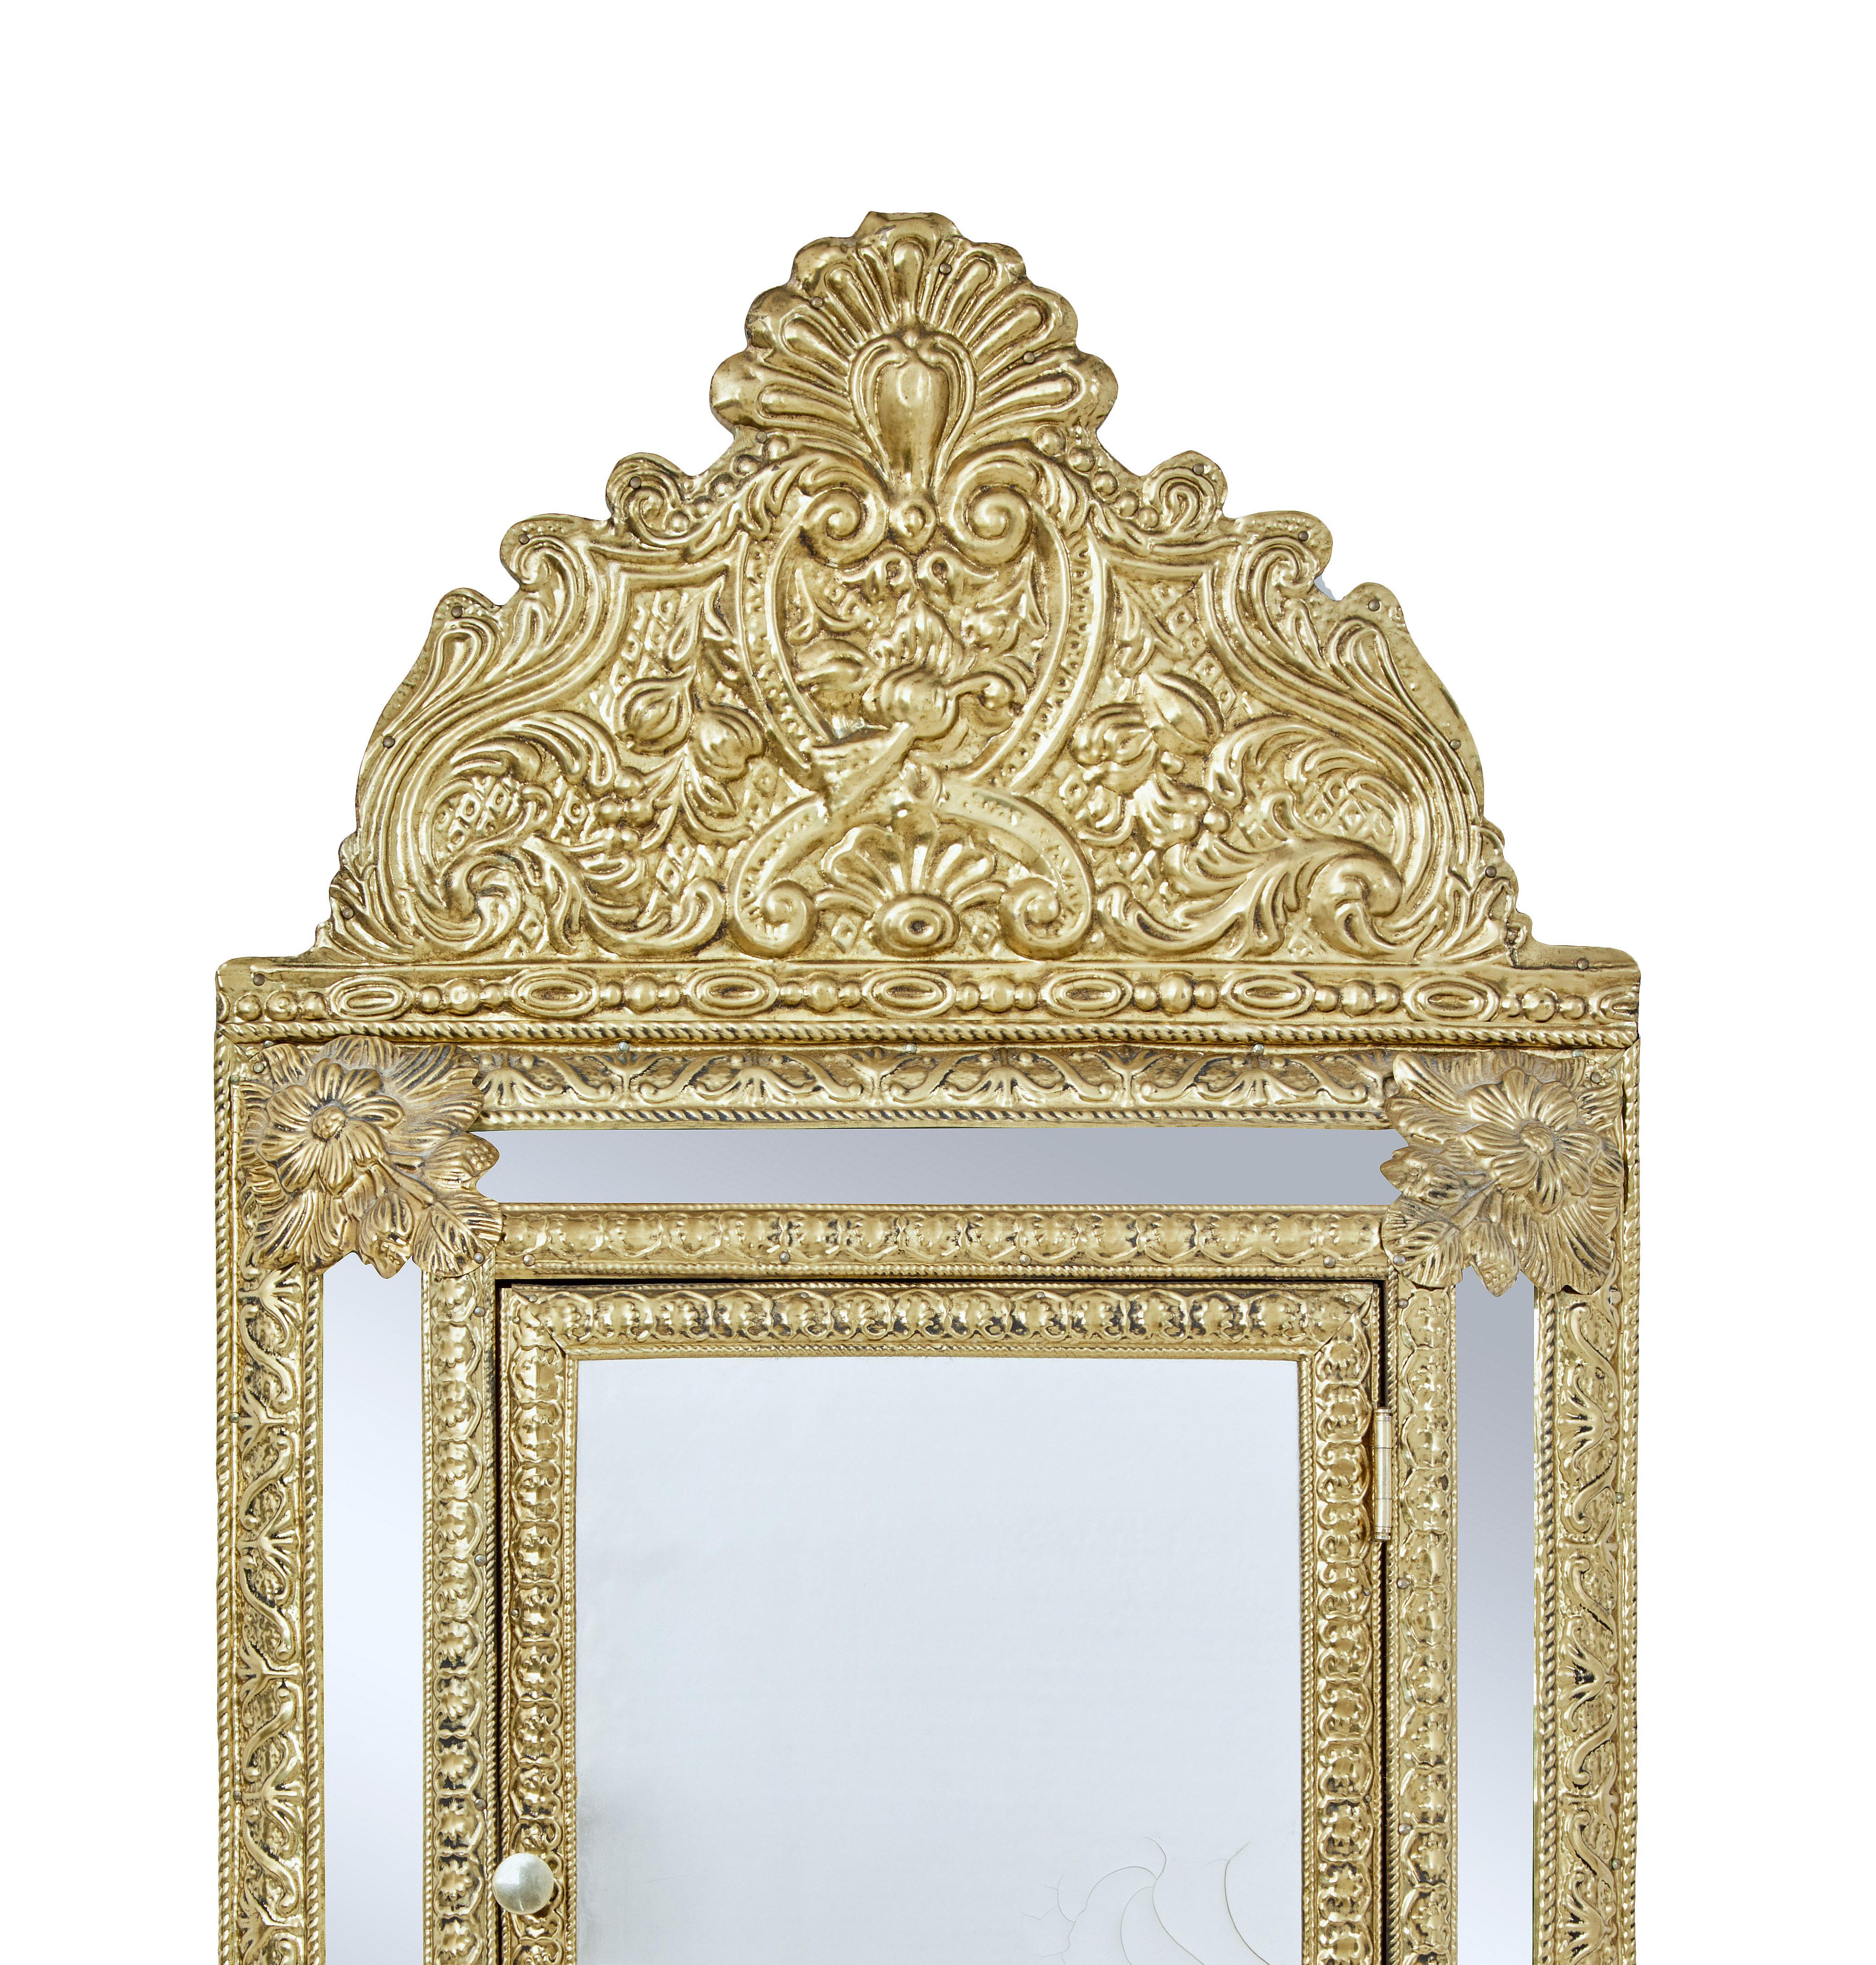 Pressed Mid-20th Century Aesthetic Movement Inspired Brass Hall Cushion Mirror